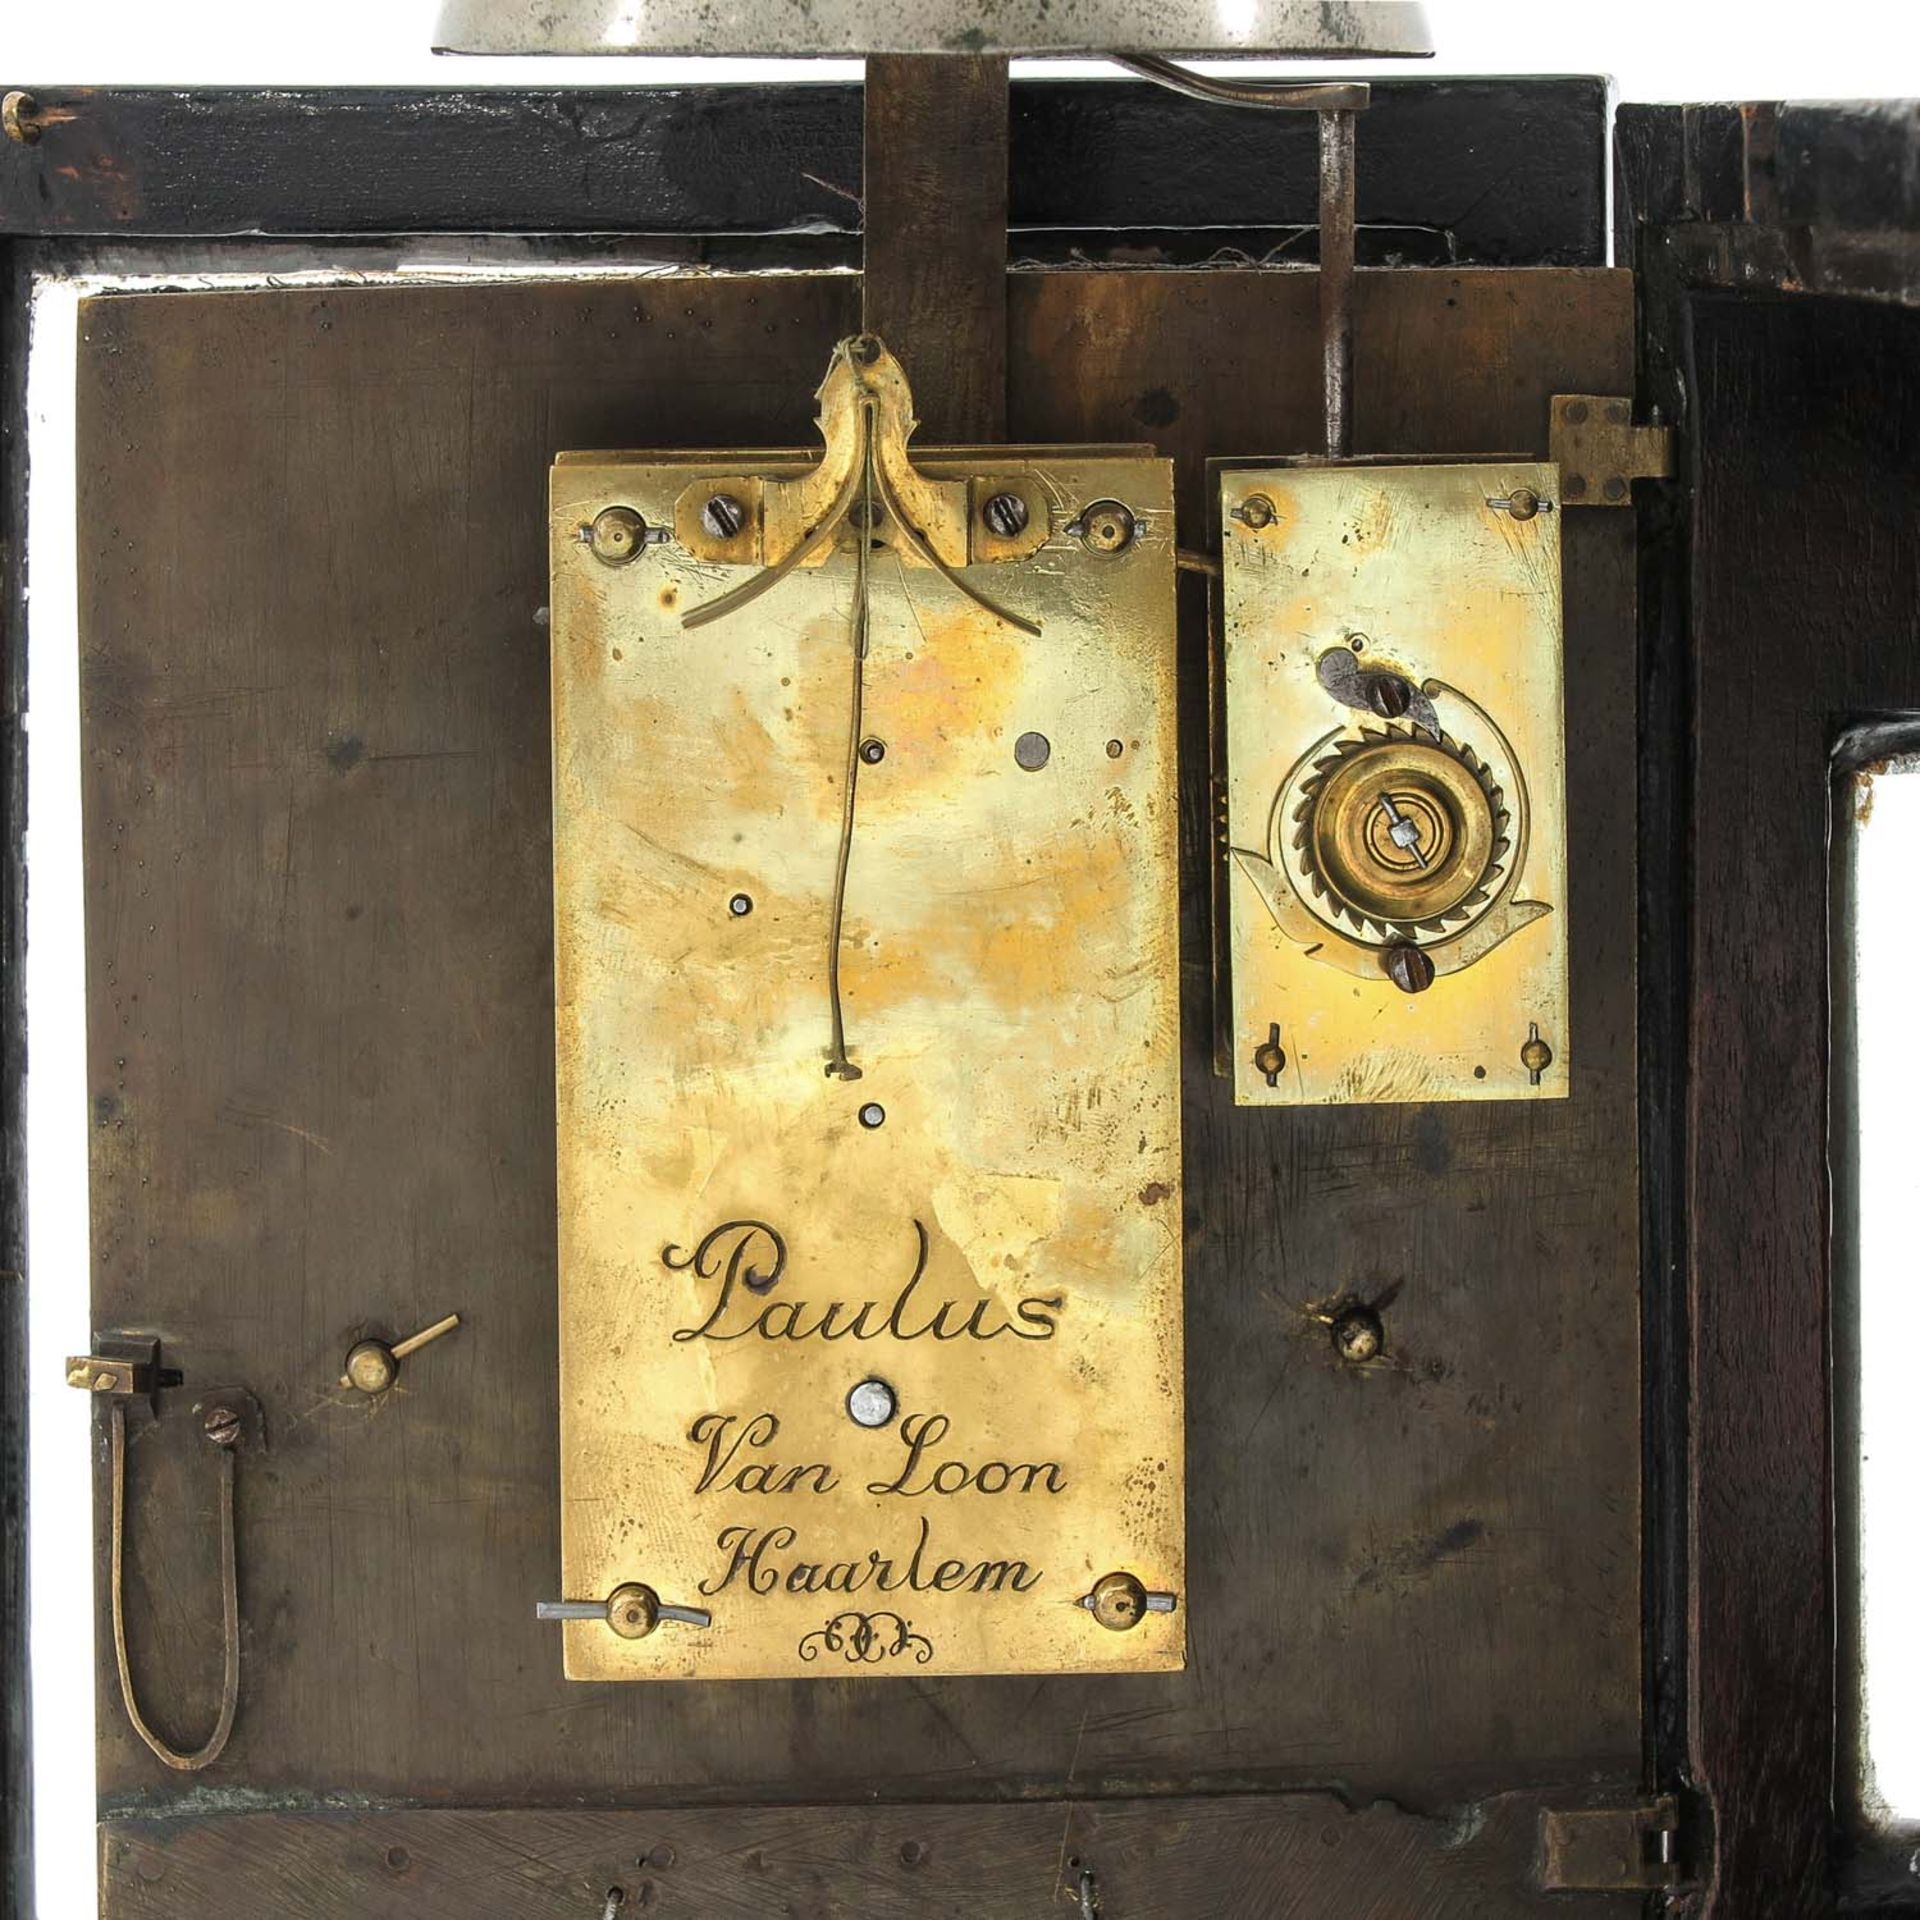 An Extremely Rare Clock Signed Paulus van Loon - Image 10 of 10